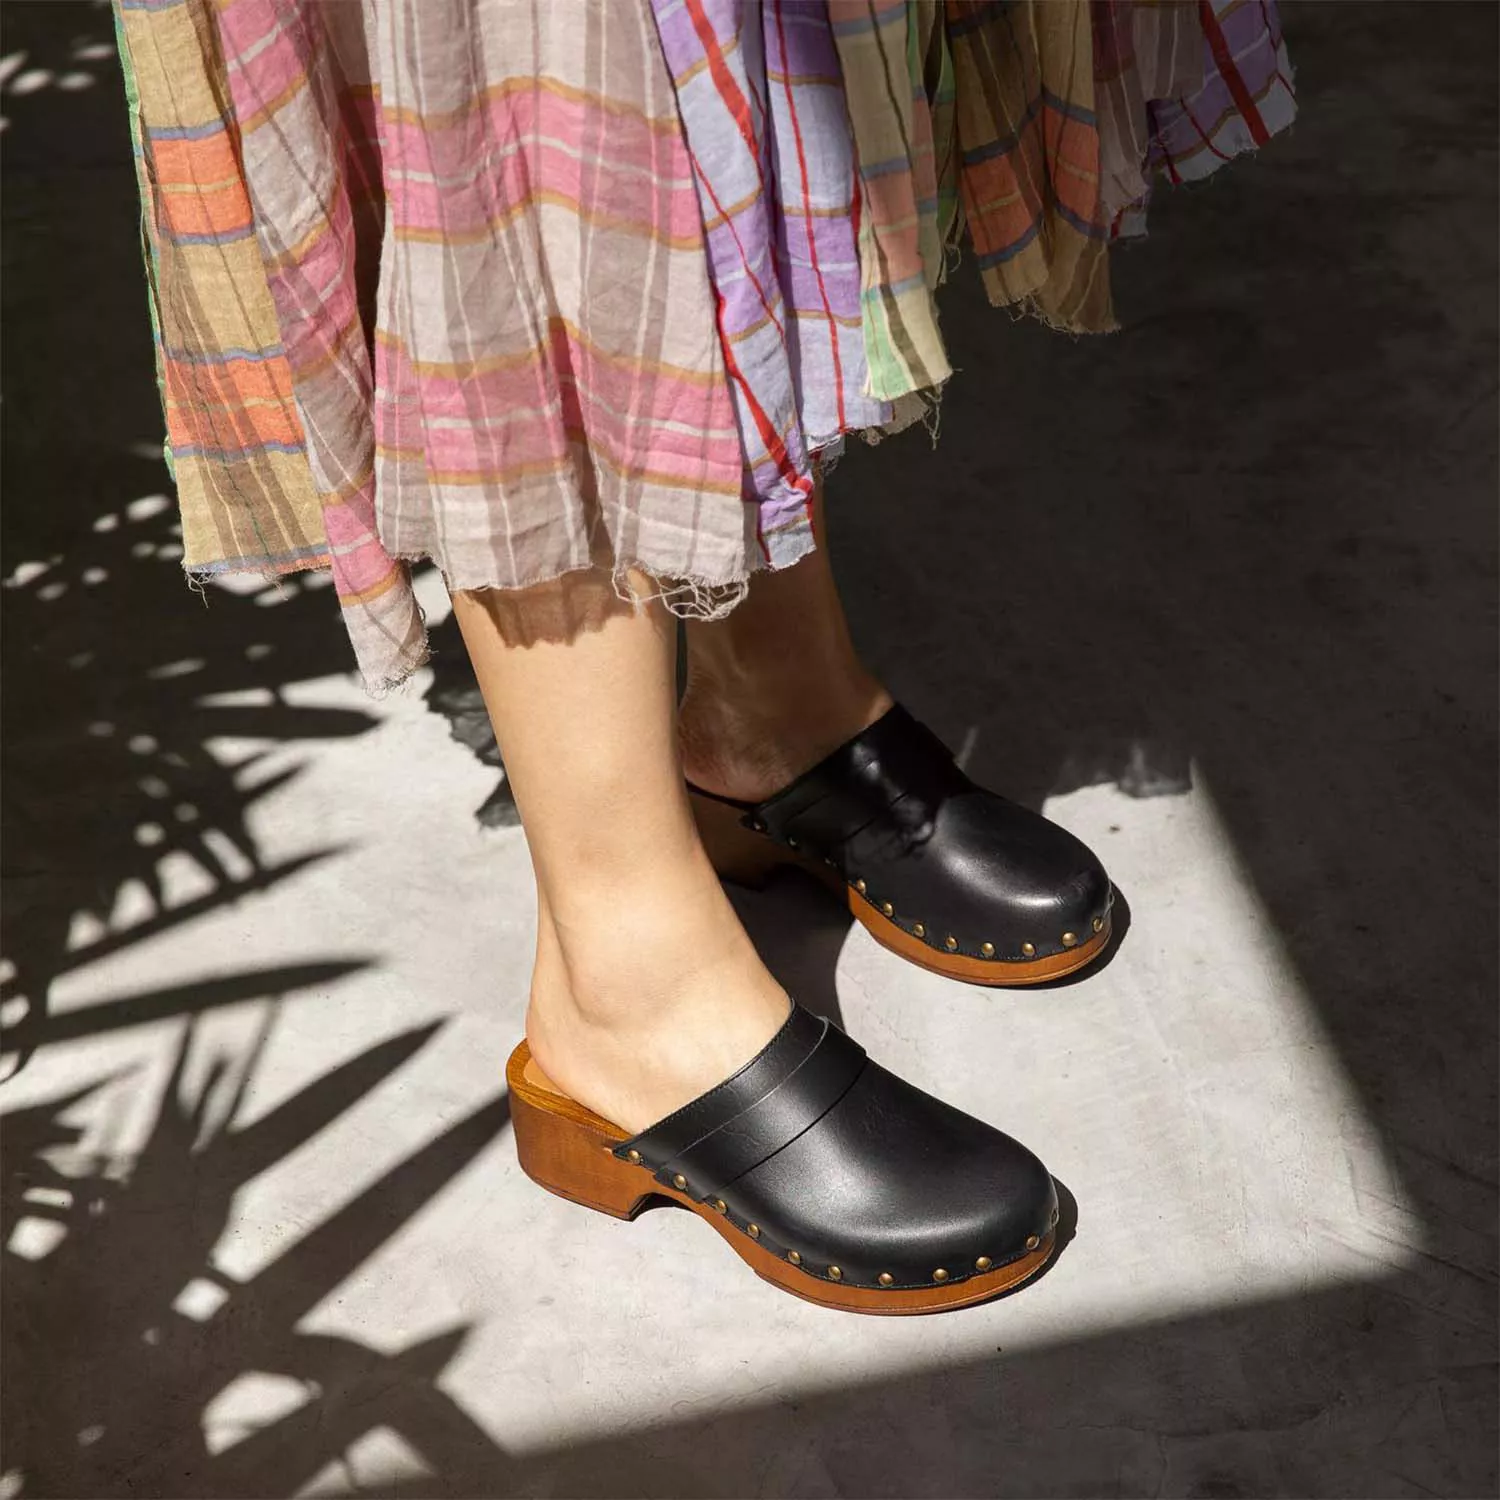 Model wearing black clogs and a plaid skirt.